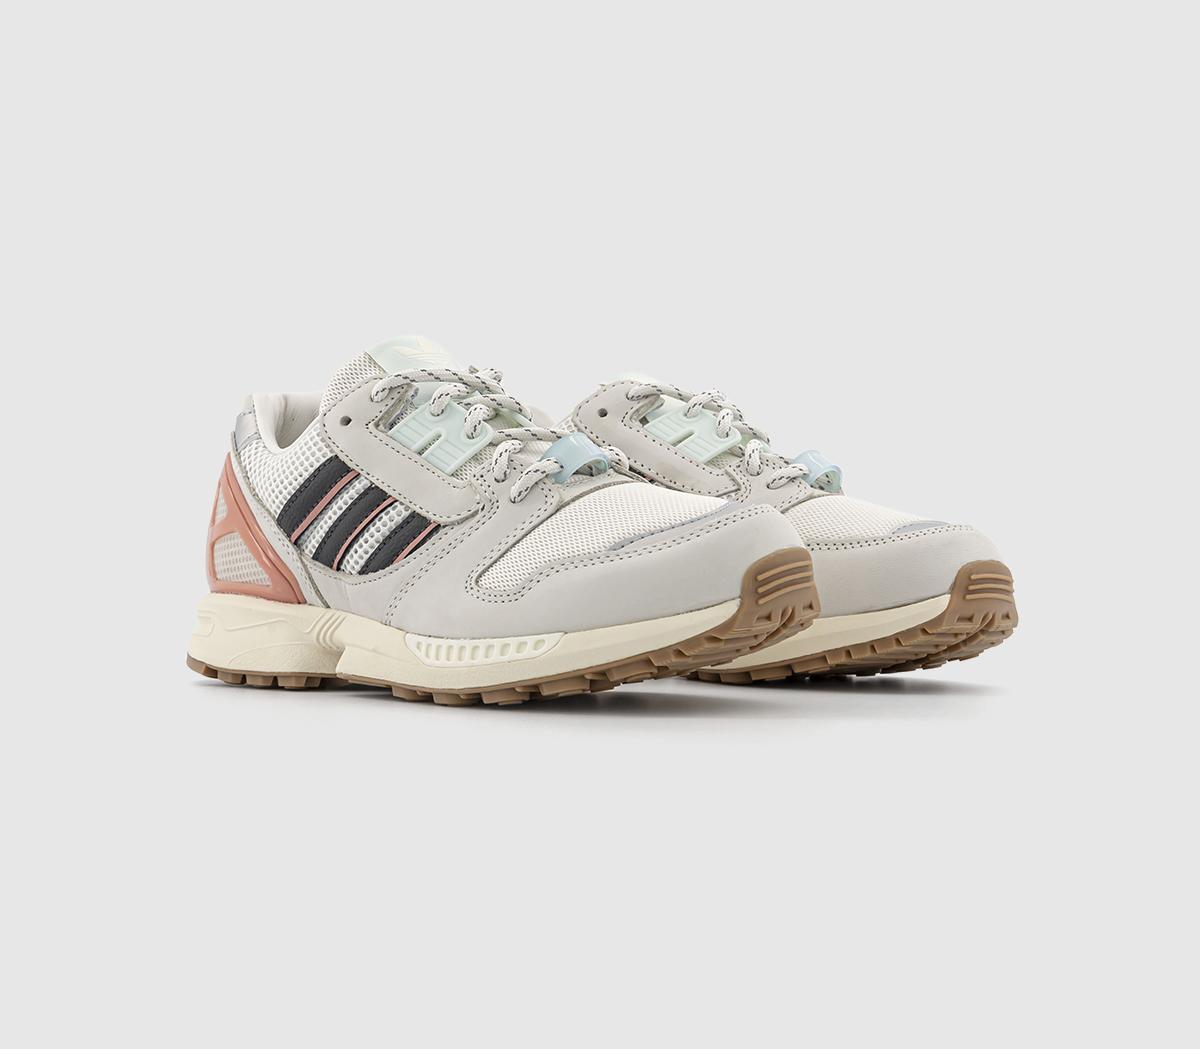 Adidas Womens Z-x Trainers White Tint Offwhite, 4.5